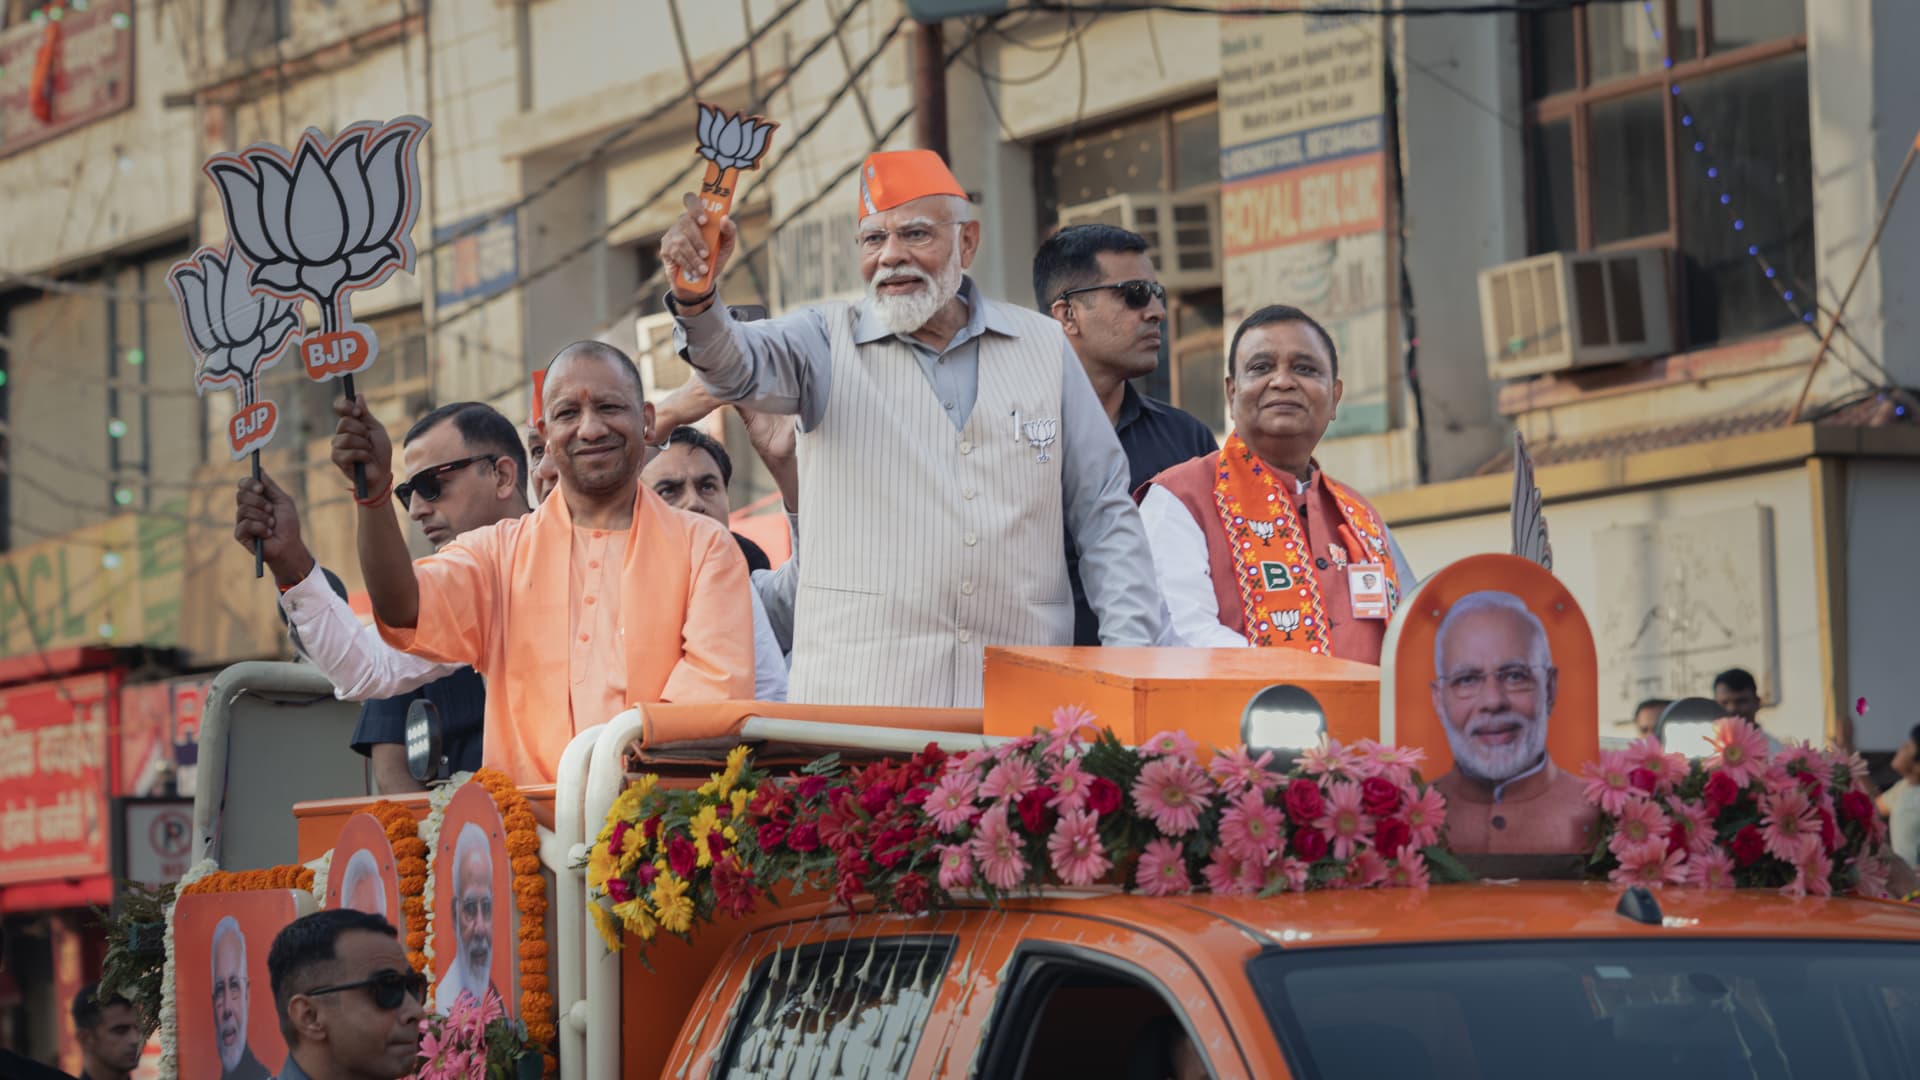 Indian election enters fourth phase amid heightened rhetoric over religion, inequality